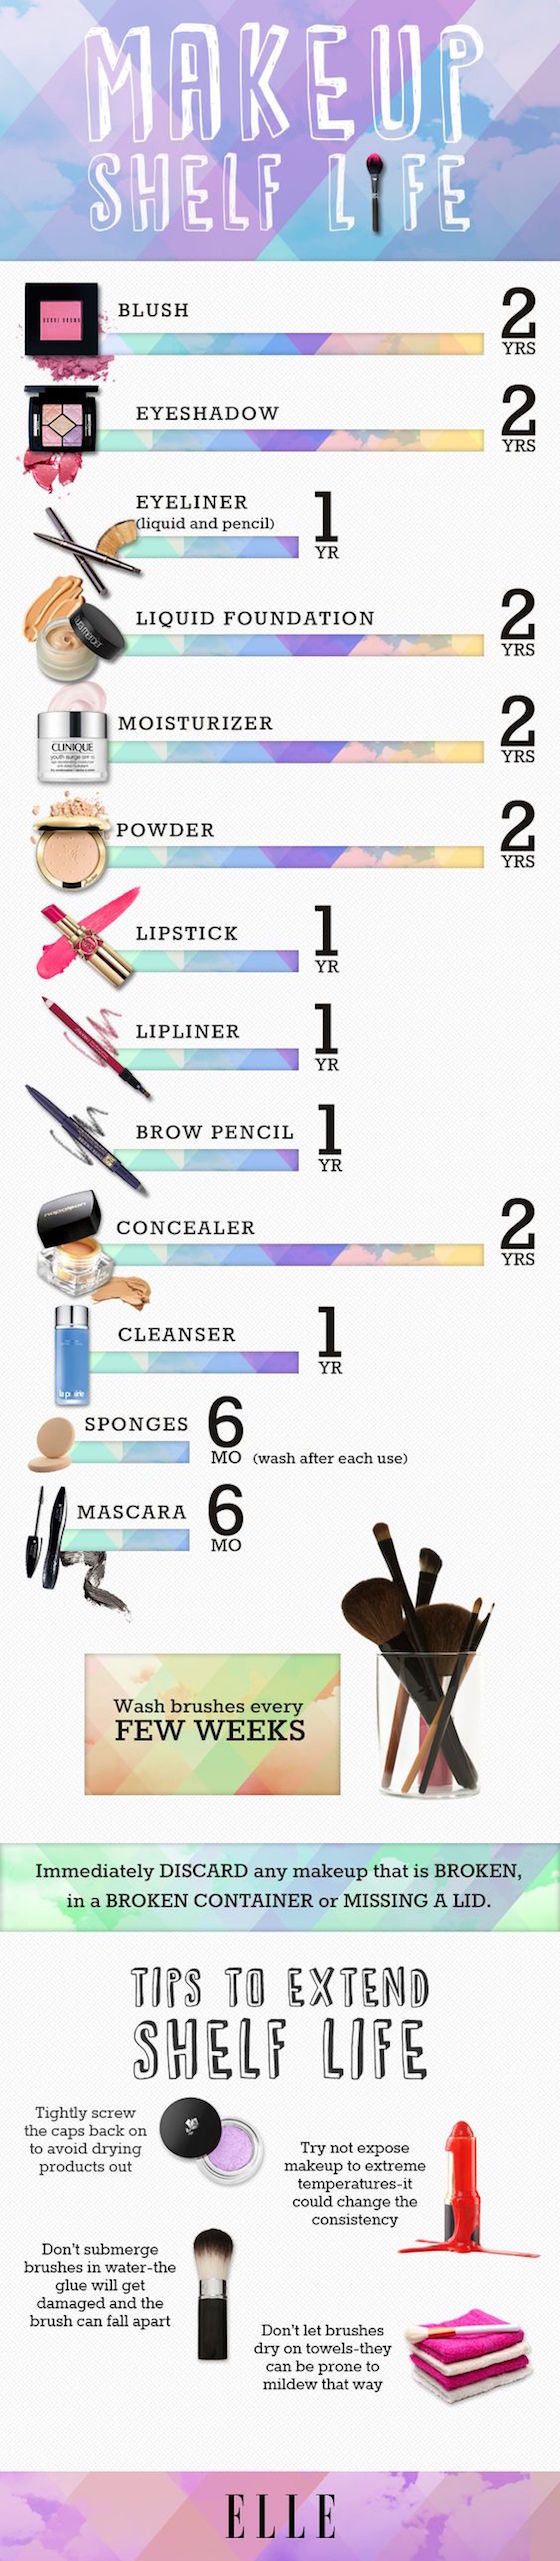 When to throw out make up 